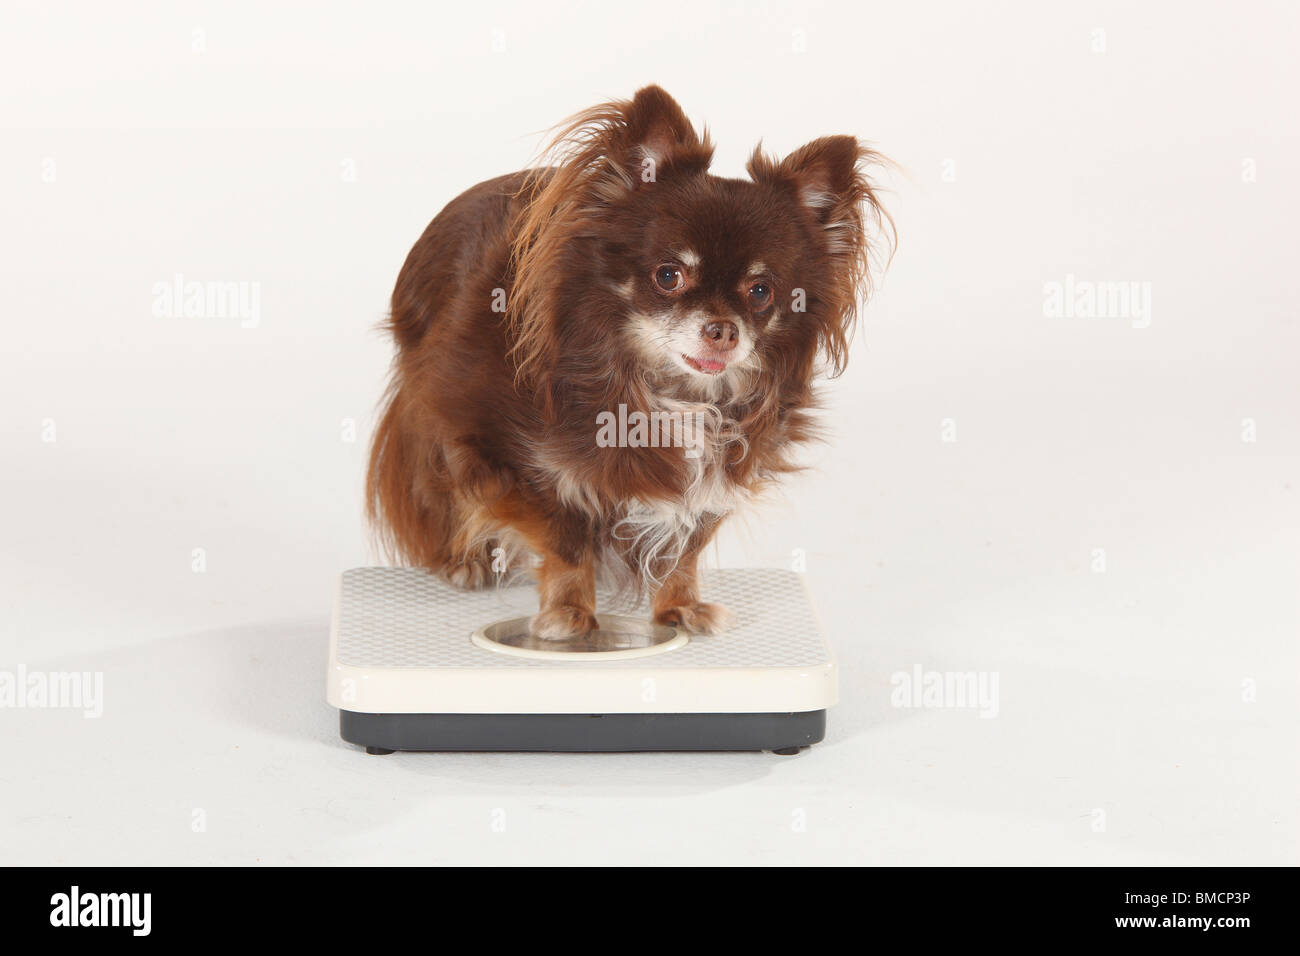 Chihuahua, longhaired, on scales Stock Photo